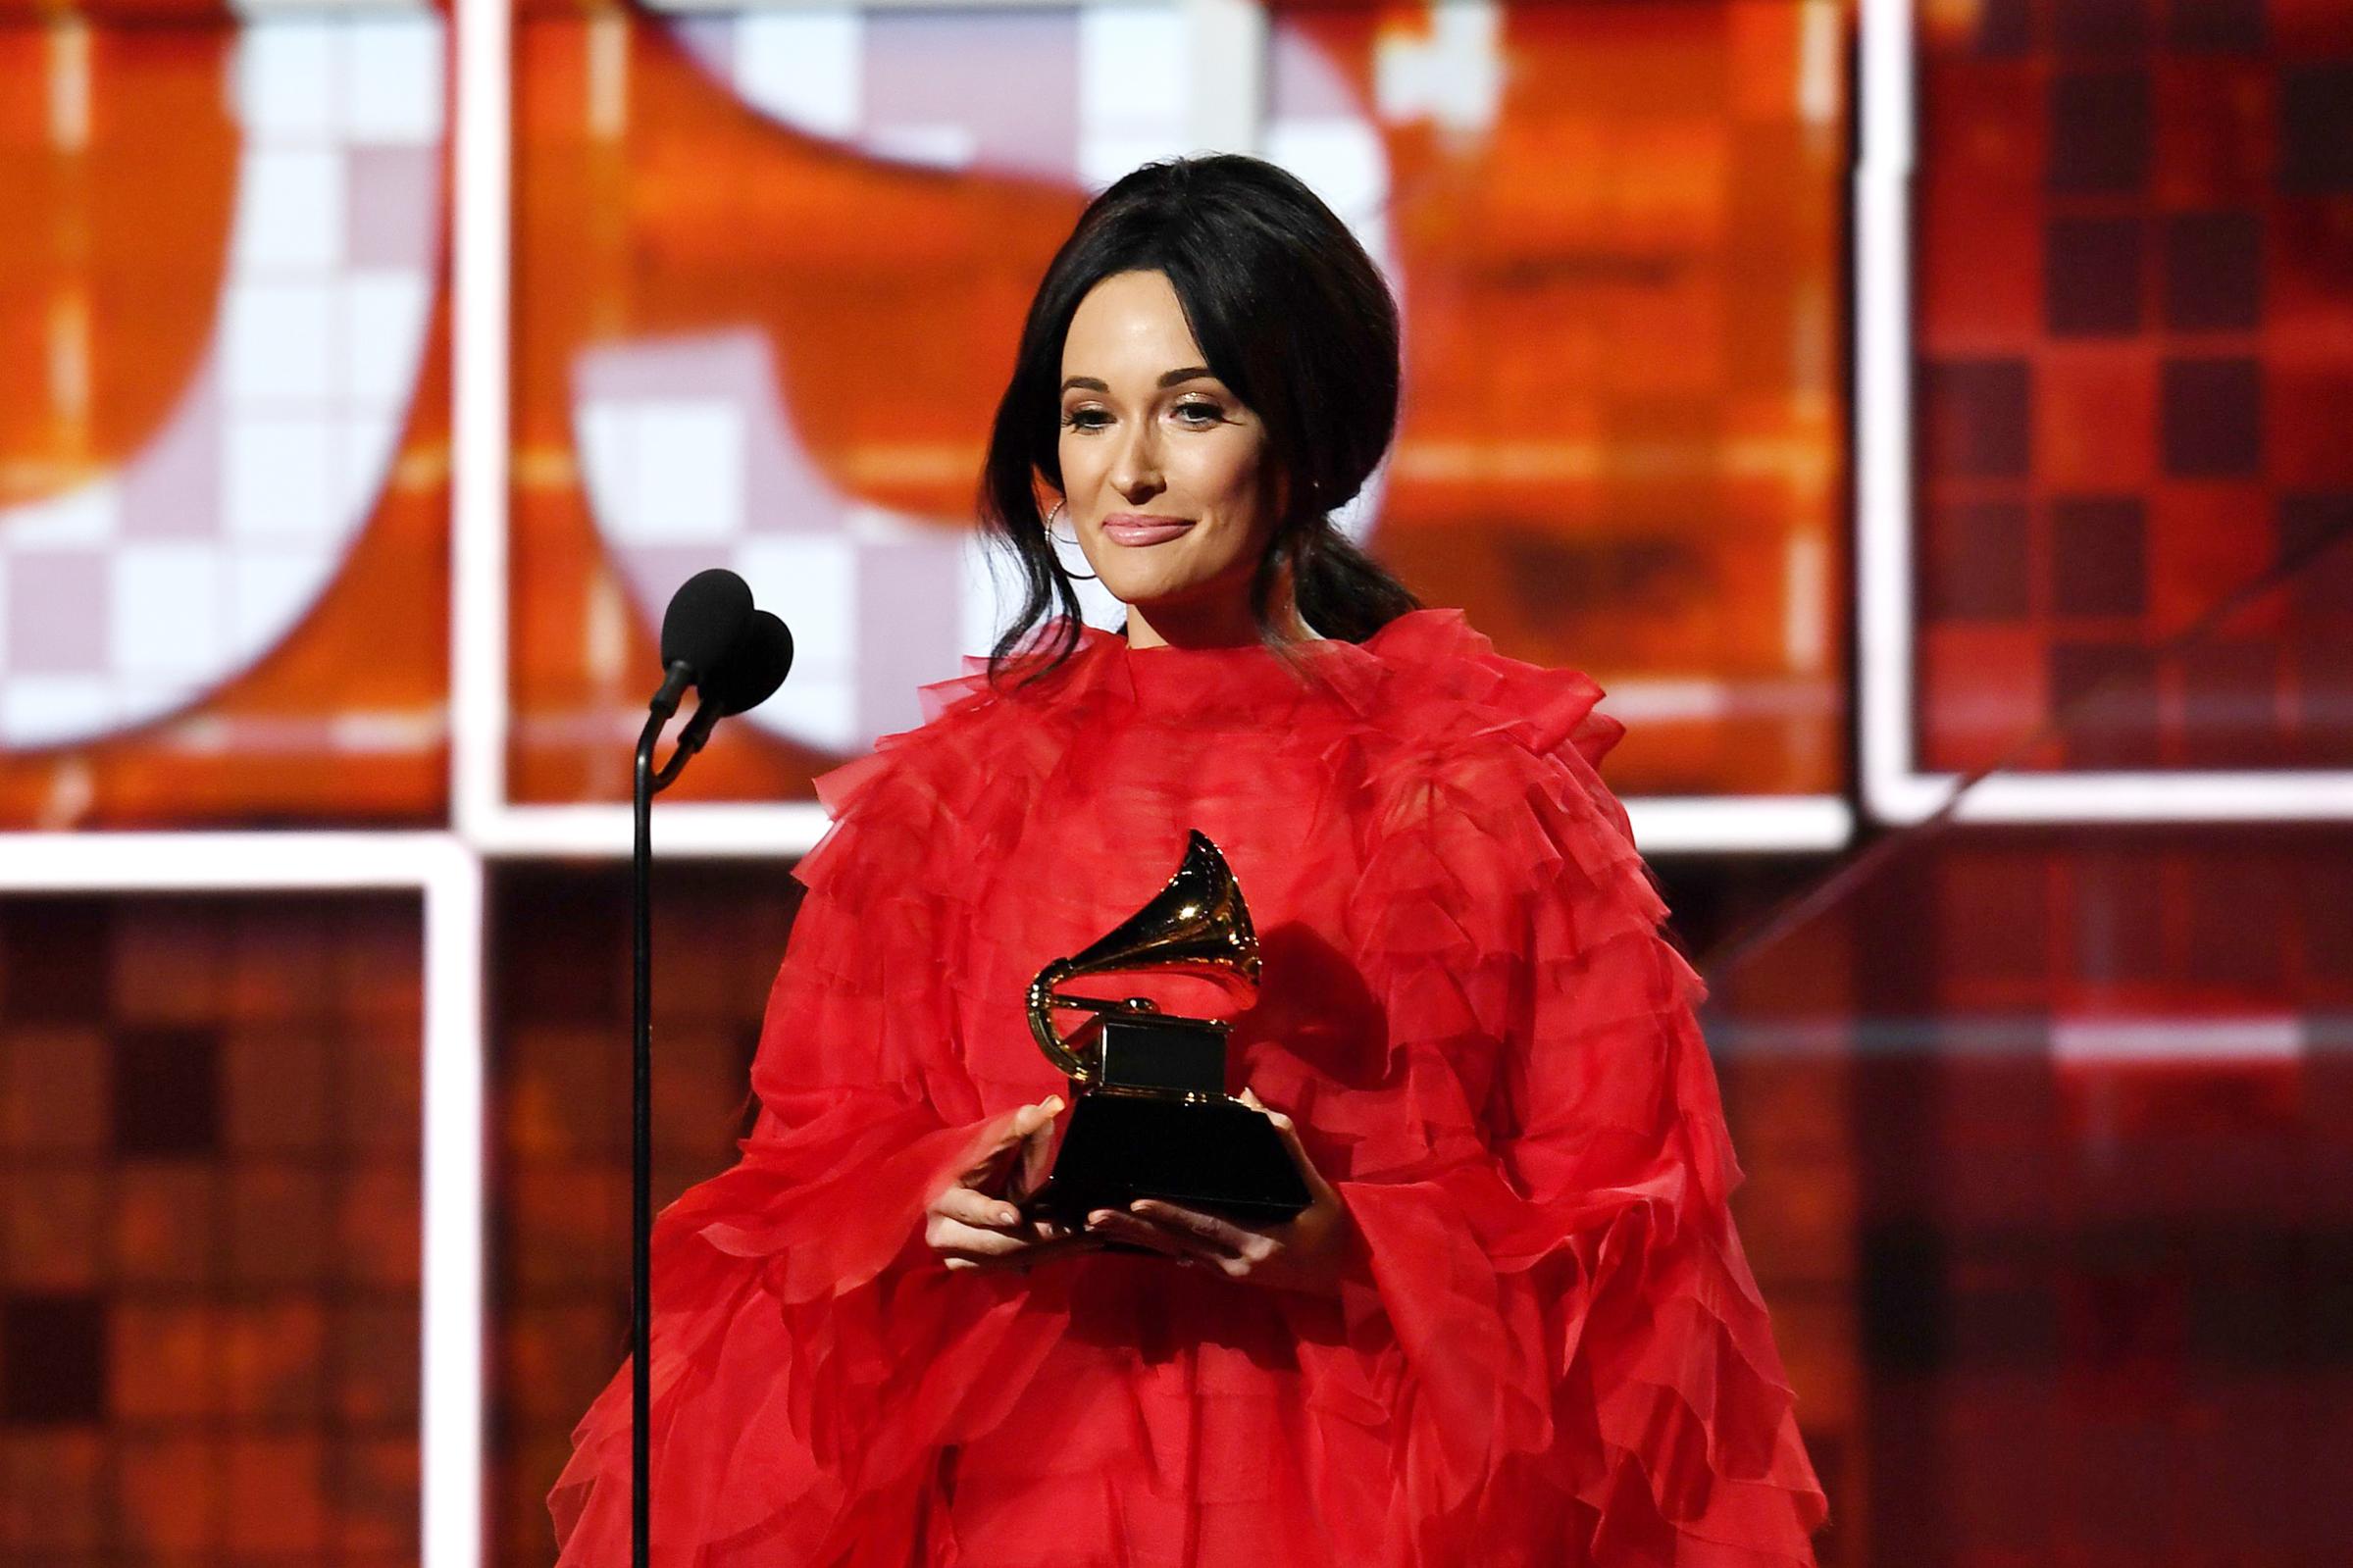 Kacey Musgraves accepts the award for Best Country Album with "Golden Hour" during the 61st Annual Grammy Awards